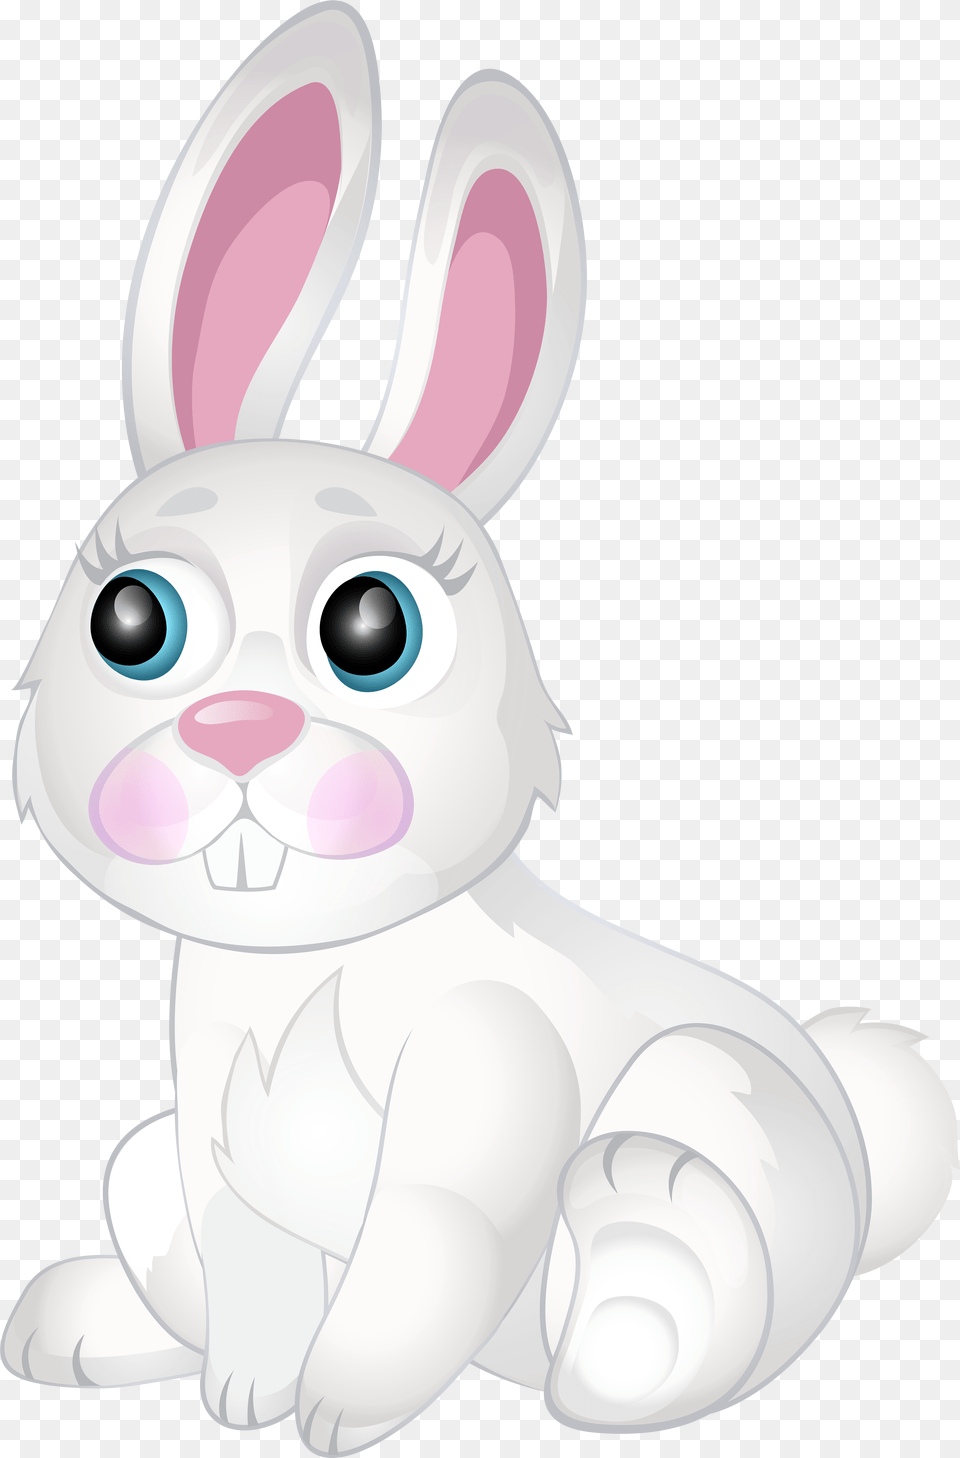 White Bunny Transparent Clip Art Image Gallery White White Bunny Cartoon Transparent, Animal, Mammal, Rabbit, Disk Free Png